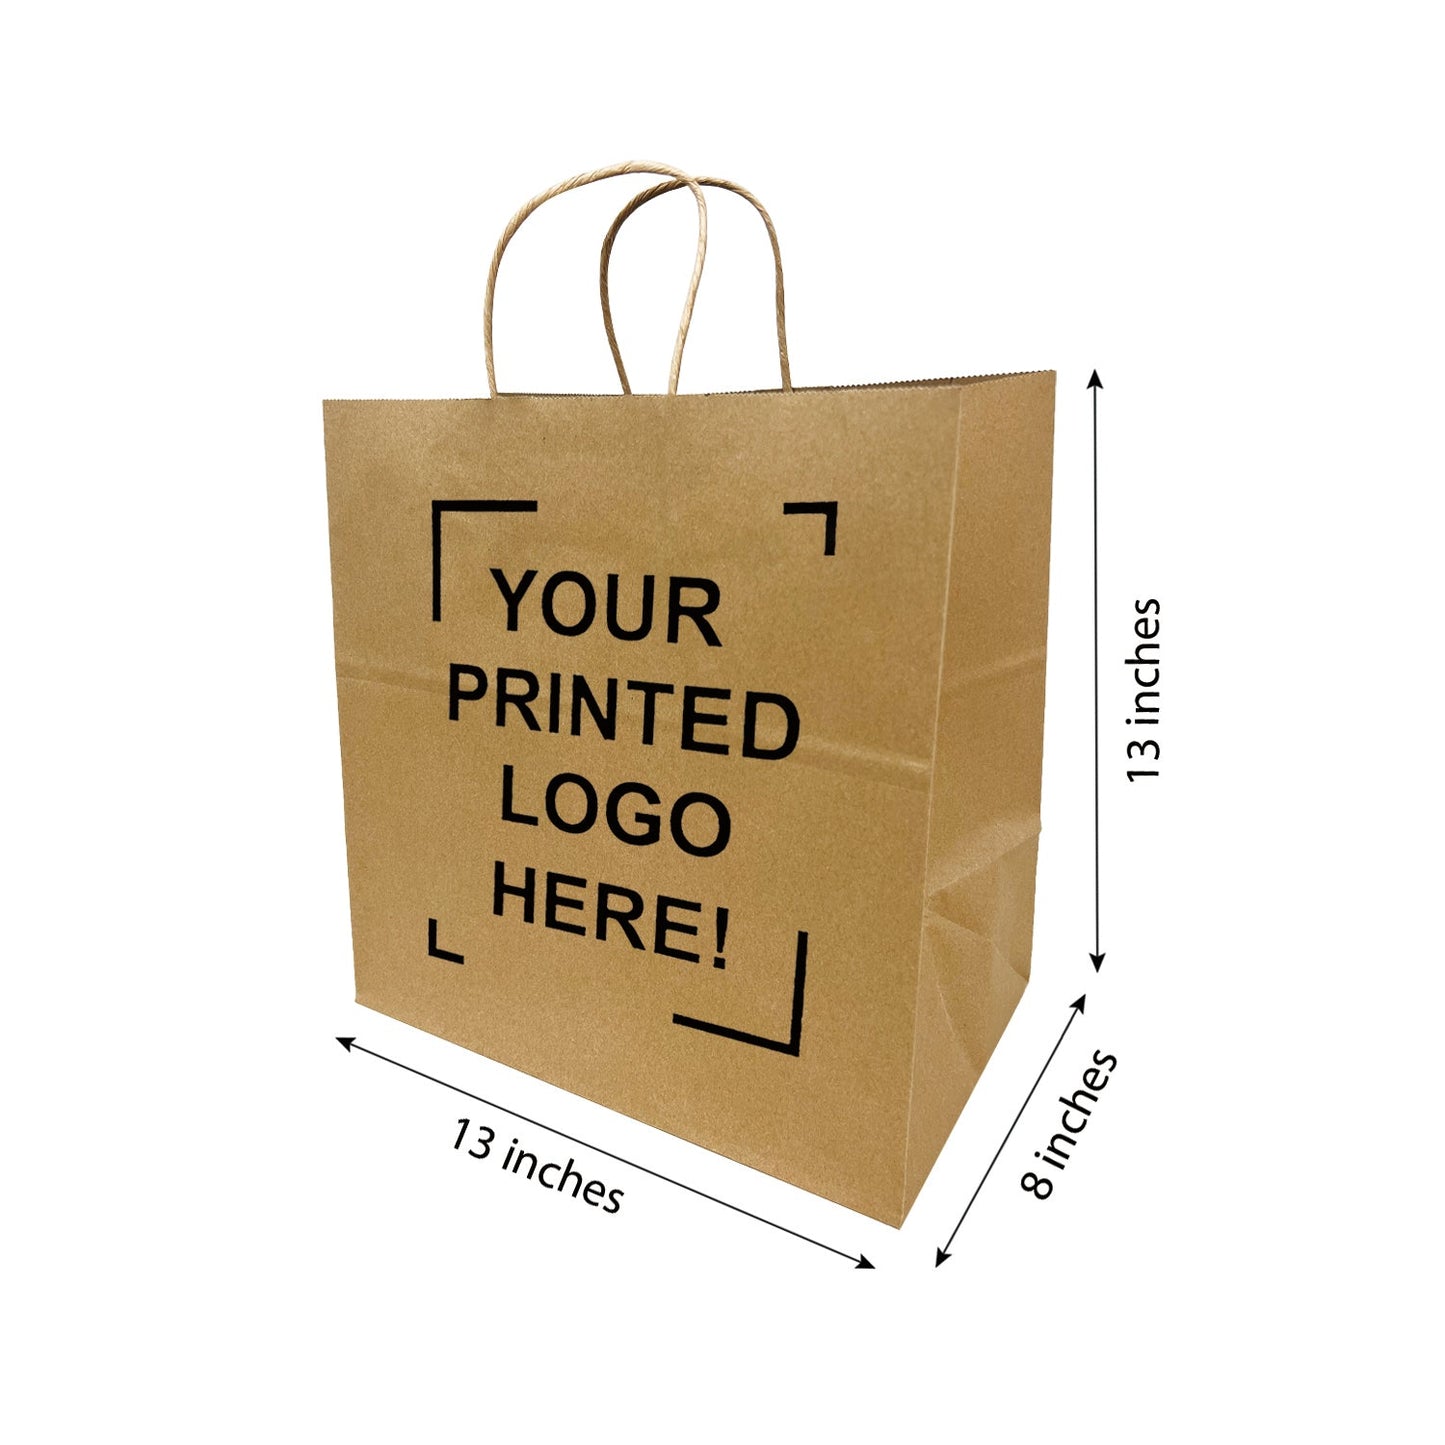 200pcs, Take Out 13x8x13 inches Kraft Paper Bags Cardboard Insert Twisted Handles; Full Color Custom Print, Printed in Canada